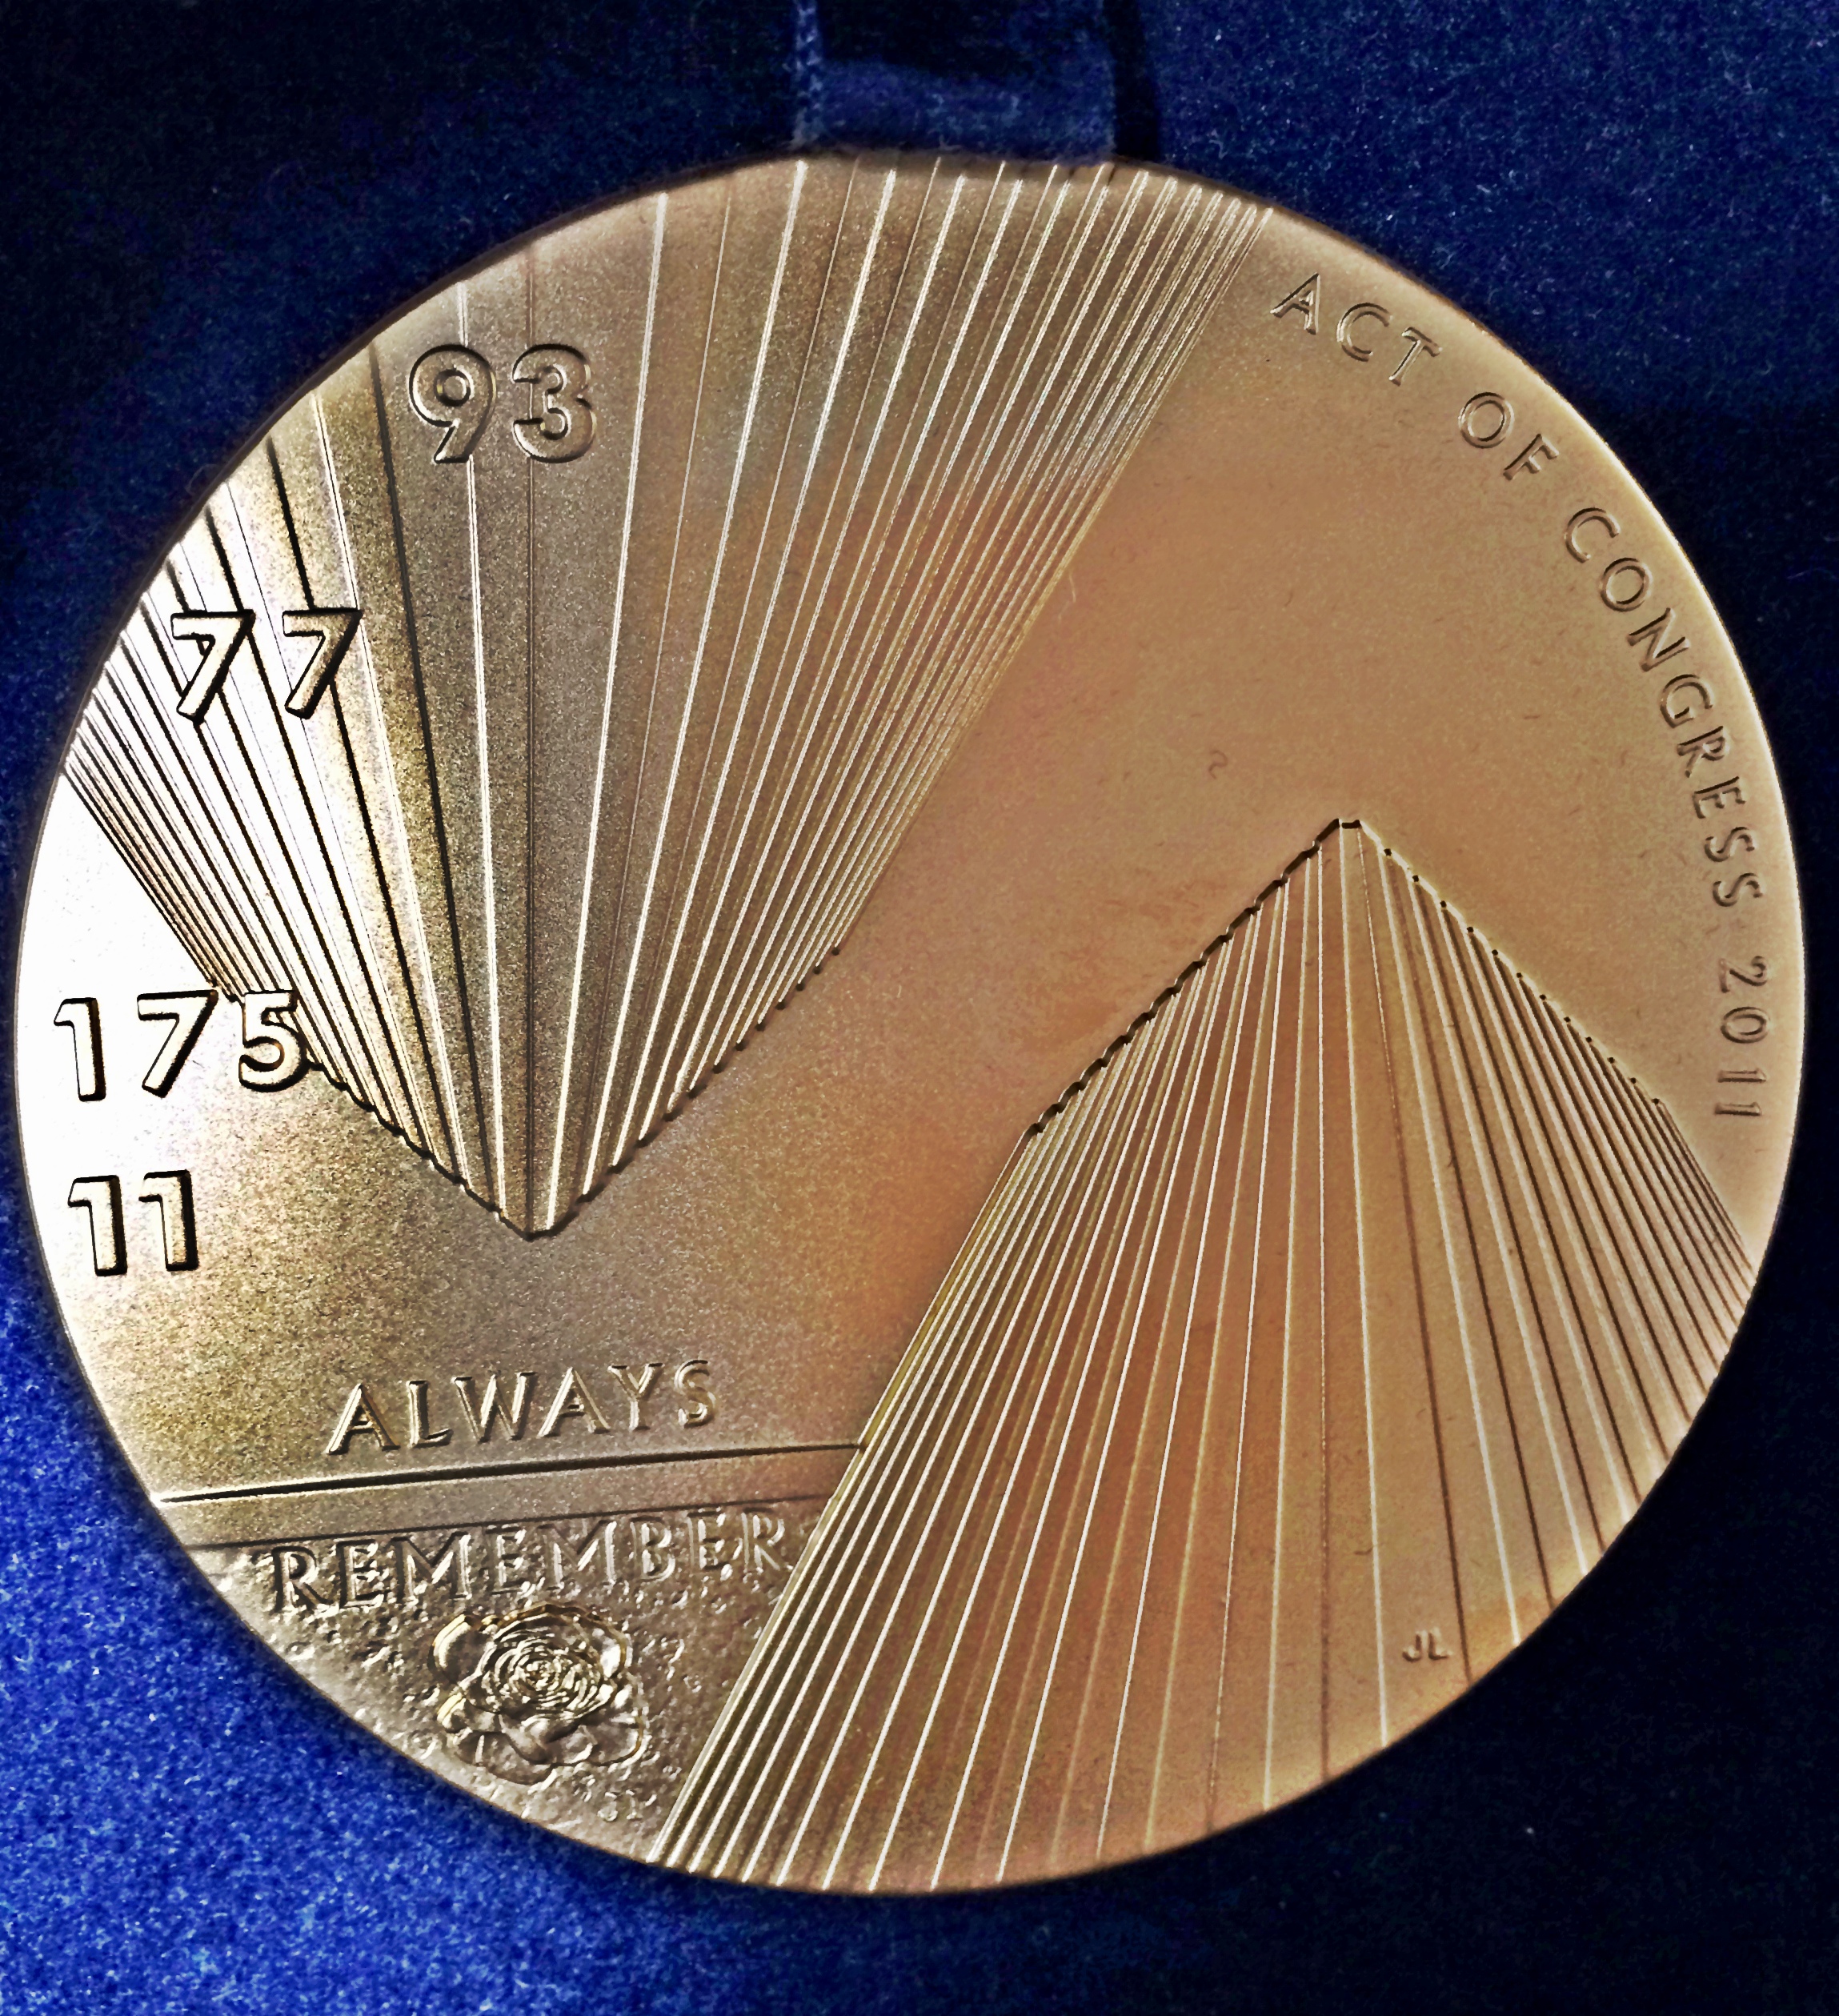 A Congressional Gold Medal given to the 9/11 Memorial Museum is displayed on a blue surface at the Museum. The circular medal is gold and features an engraving of the Twin Towers and the numbers of the four flights that were hijacked. It reads “always remember” and “act of Congress 2011.”